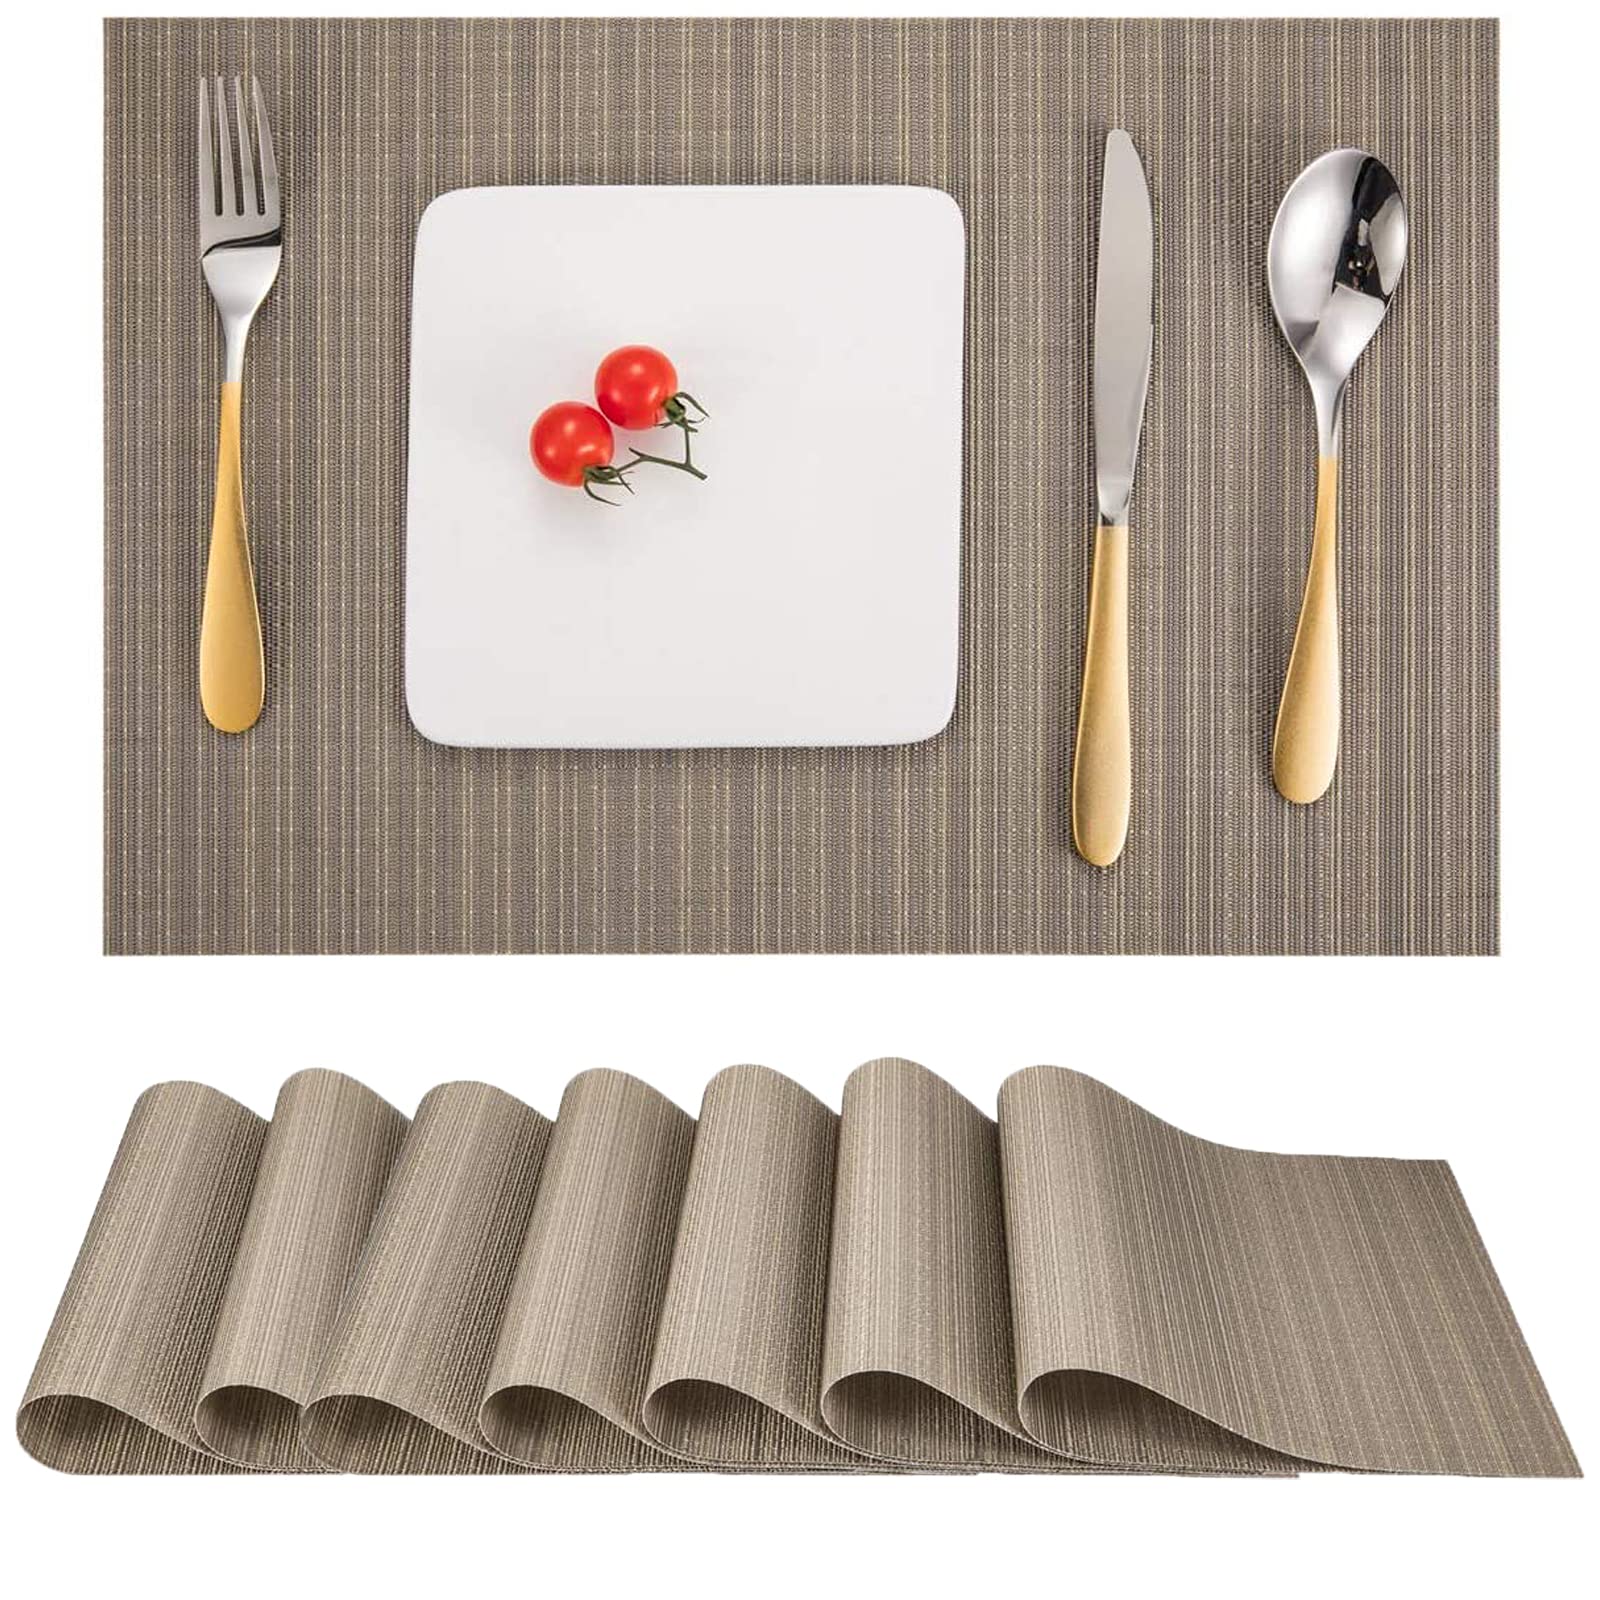 Myir JUN Place Mats, Table Mats Set of 8 Indoor Placemats Washable Non-Slip Heatproof Woven Placemats for Dining Table Fabric Pl